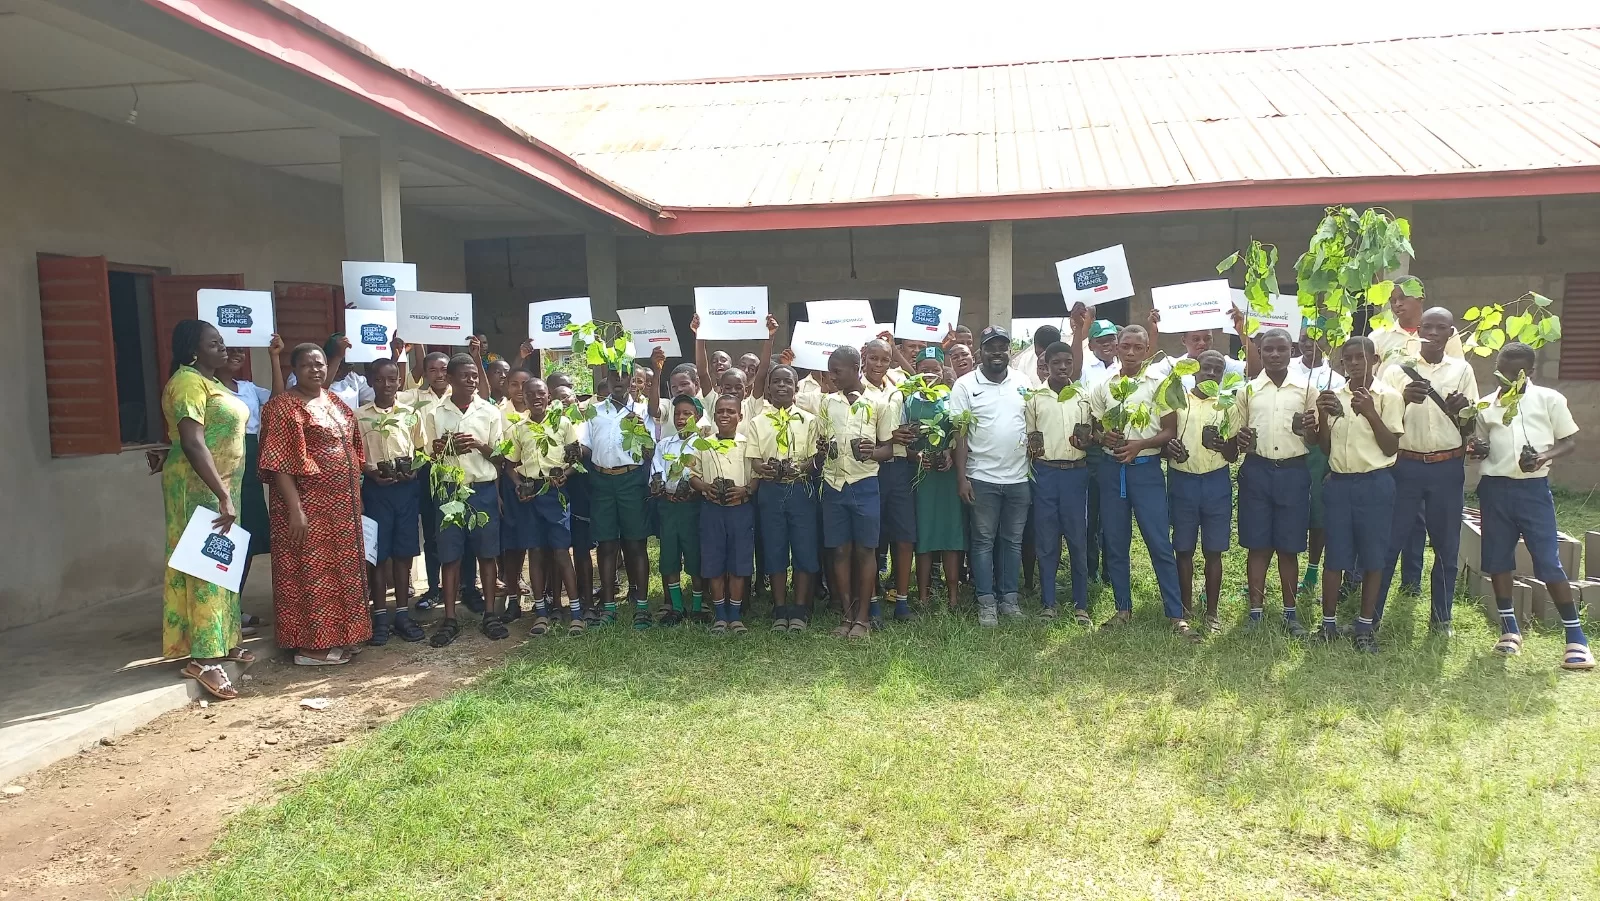 Nigerian Students, Plant, Trees, International Day Of The African Child, Digital Age, Knowledge Economy, Information Age, National Development, Barry Callebaut, Seed for Change, Sustainability, Cocoa production, International Day of the African Child International Day of the African Child